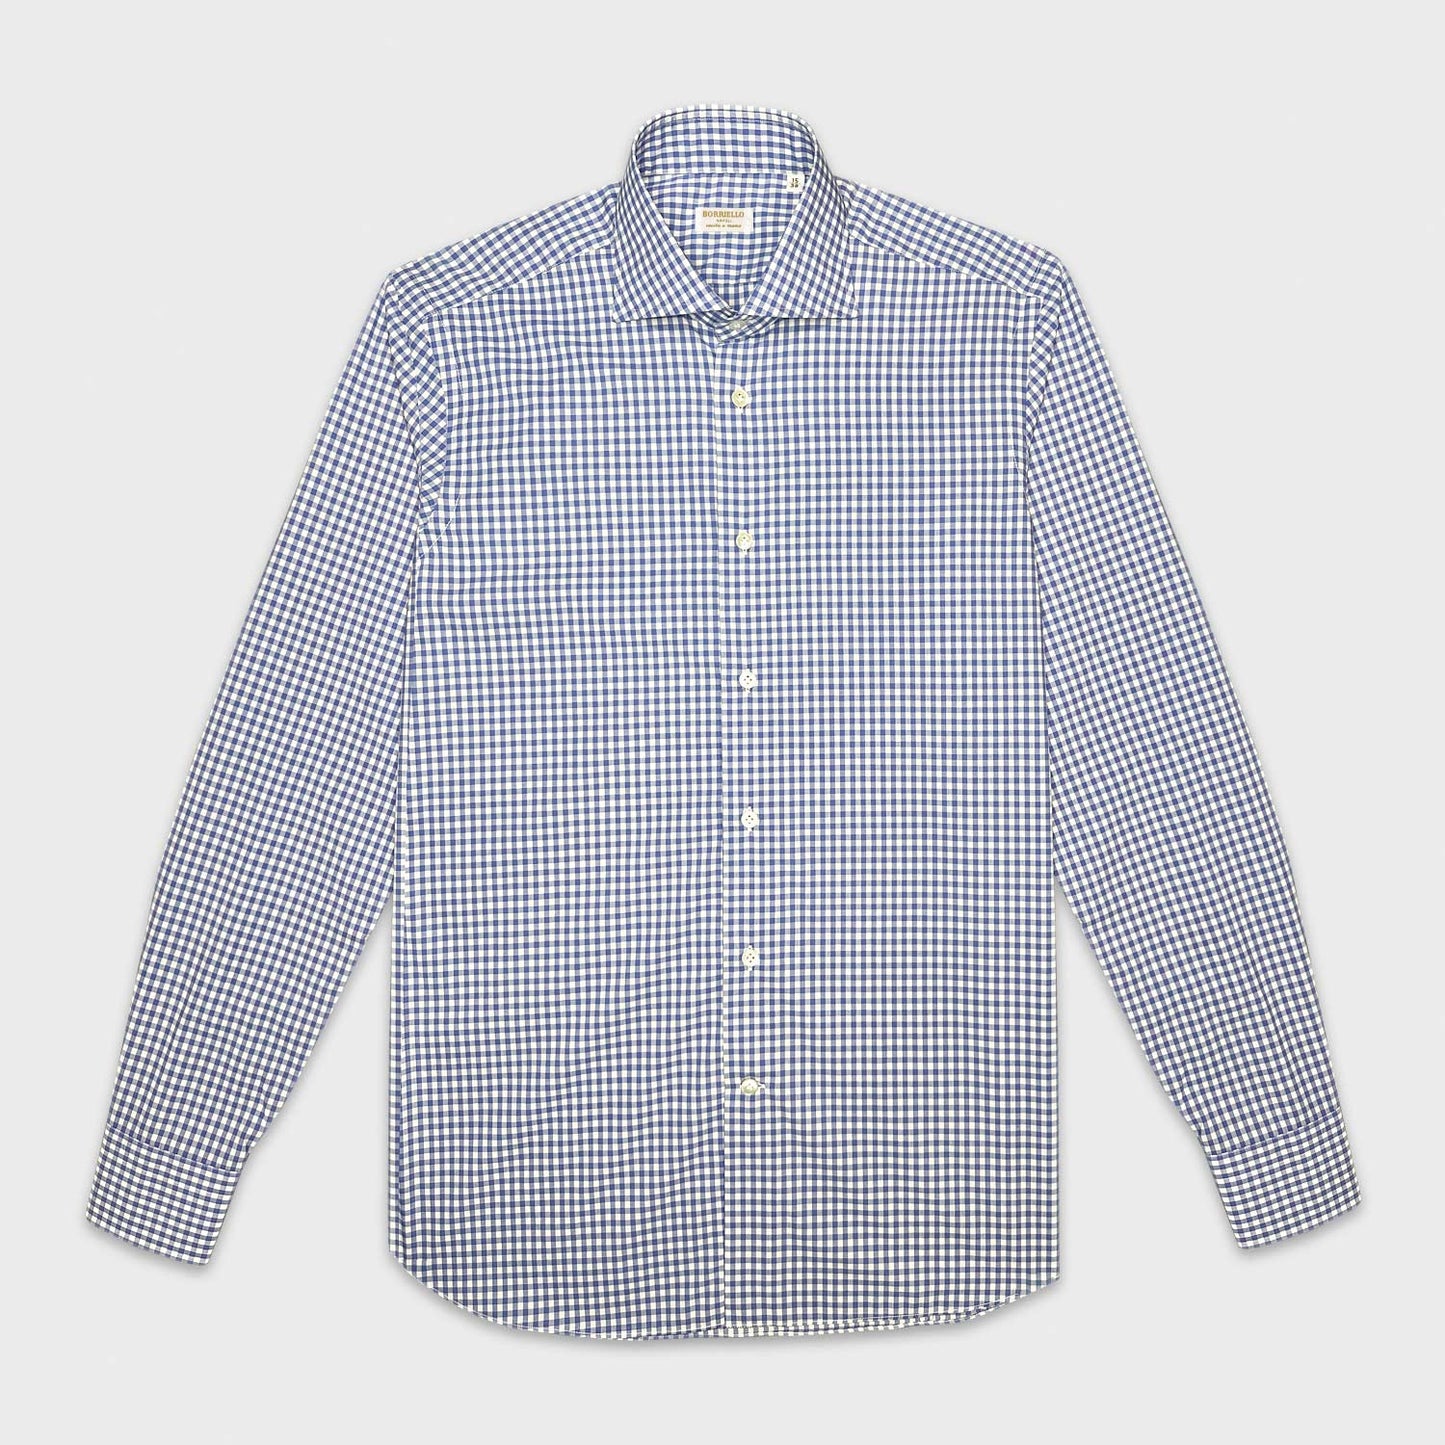 Red and blue checked shirt made with Thomas Mason fabric yarn-dyed in popeline cotton. Handmade shirt by Borriello Napoli exclusive for Wools Boutique Uomo, ideal both for the office or casual outfit with a bright appearance and a soft and smooth hand.